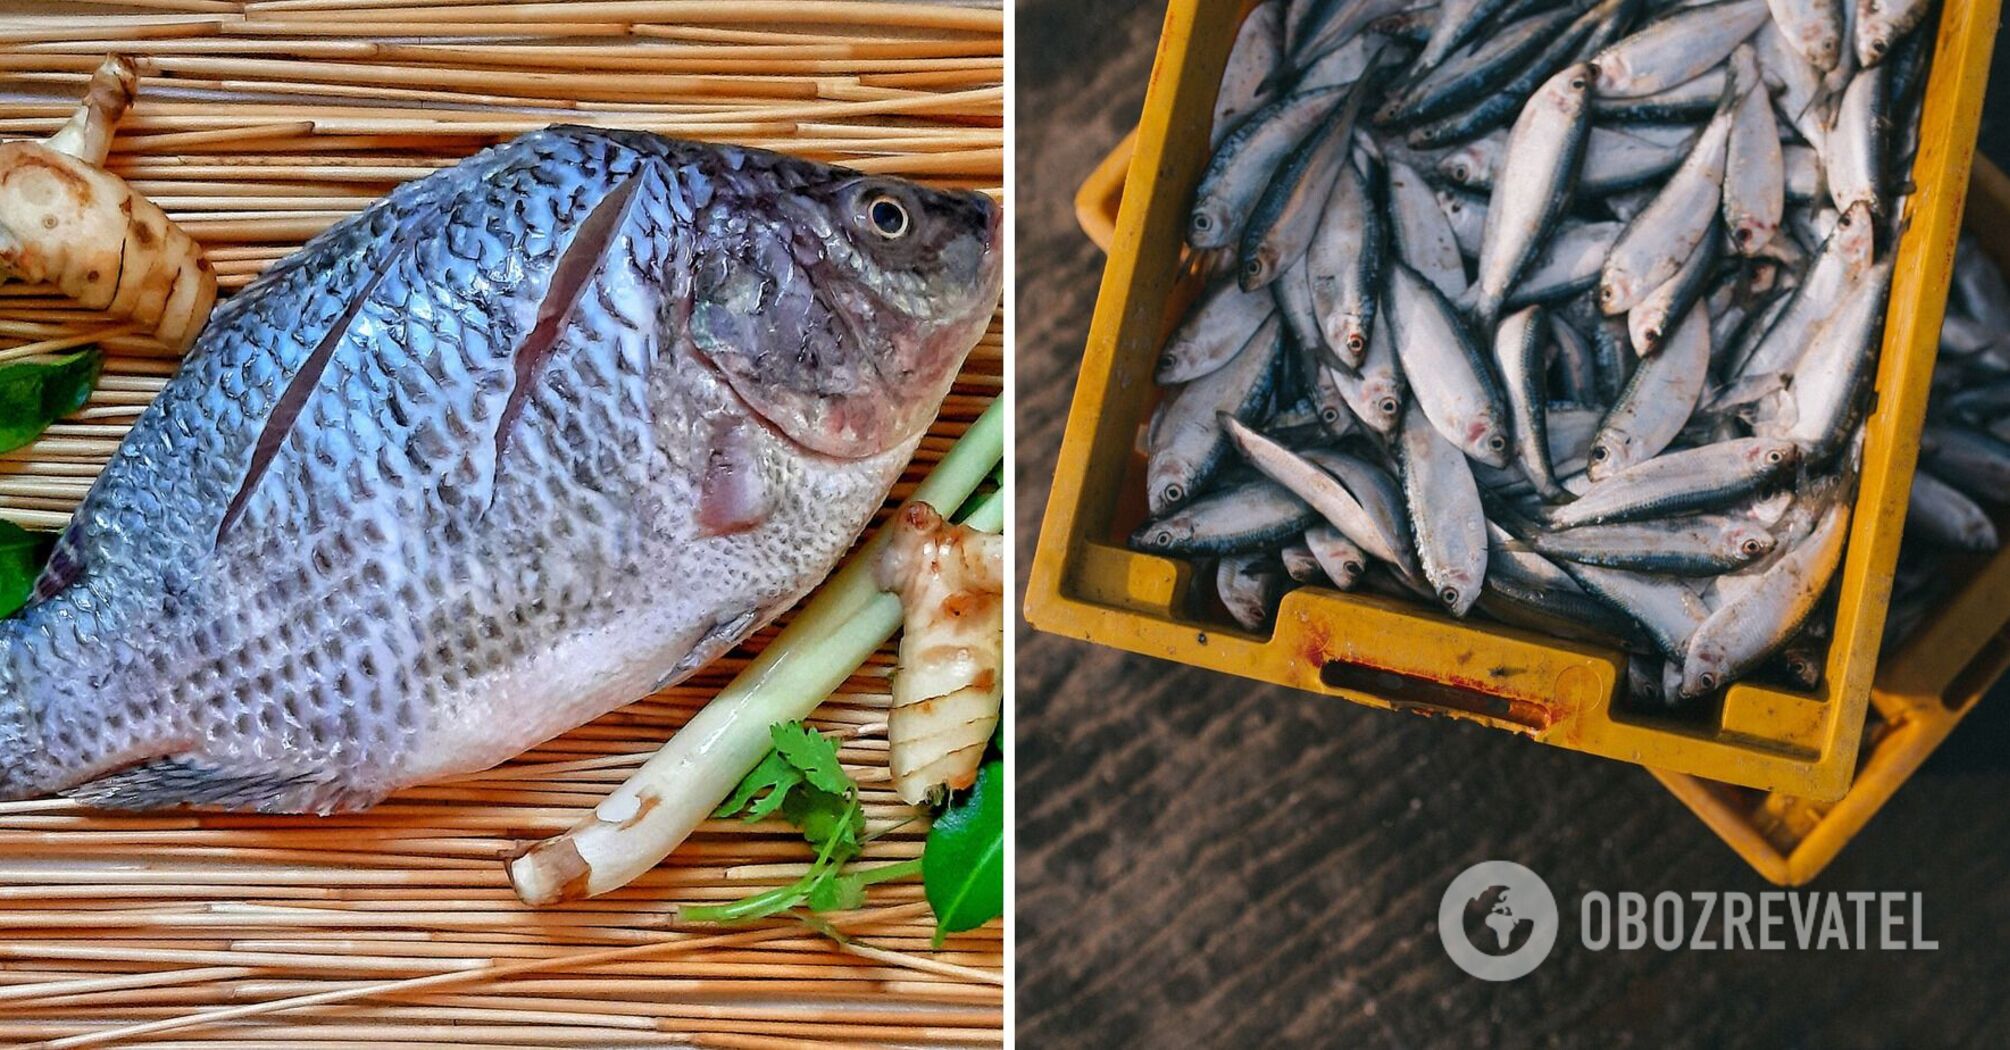 Which fish is the healthiest